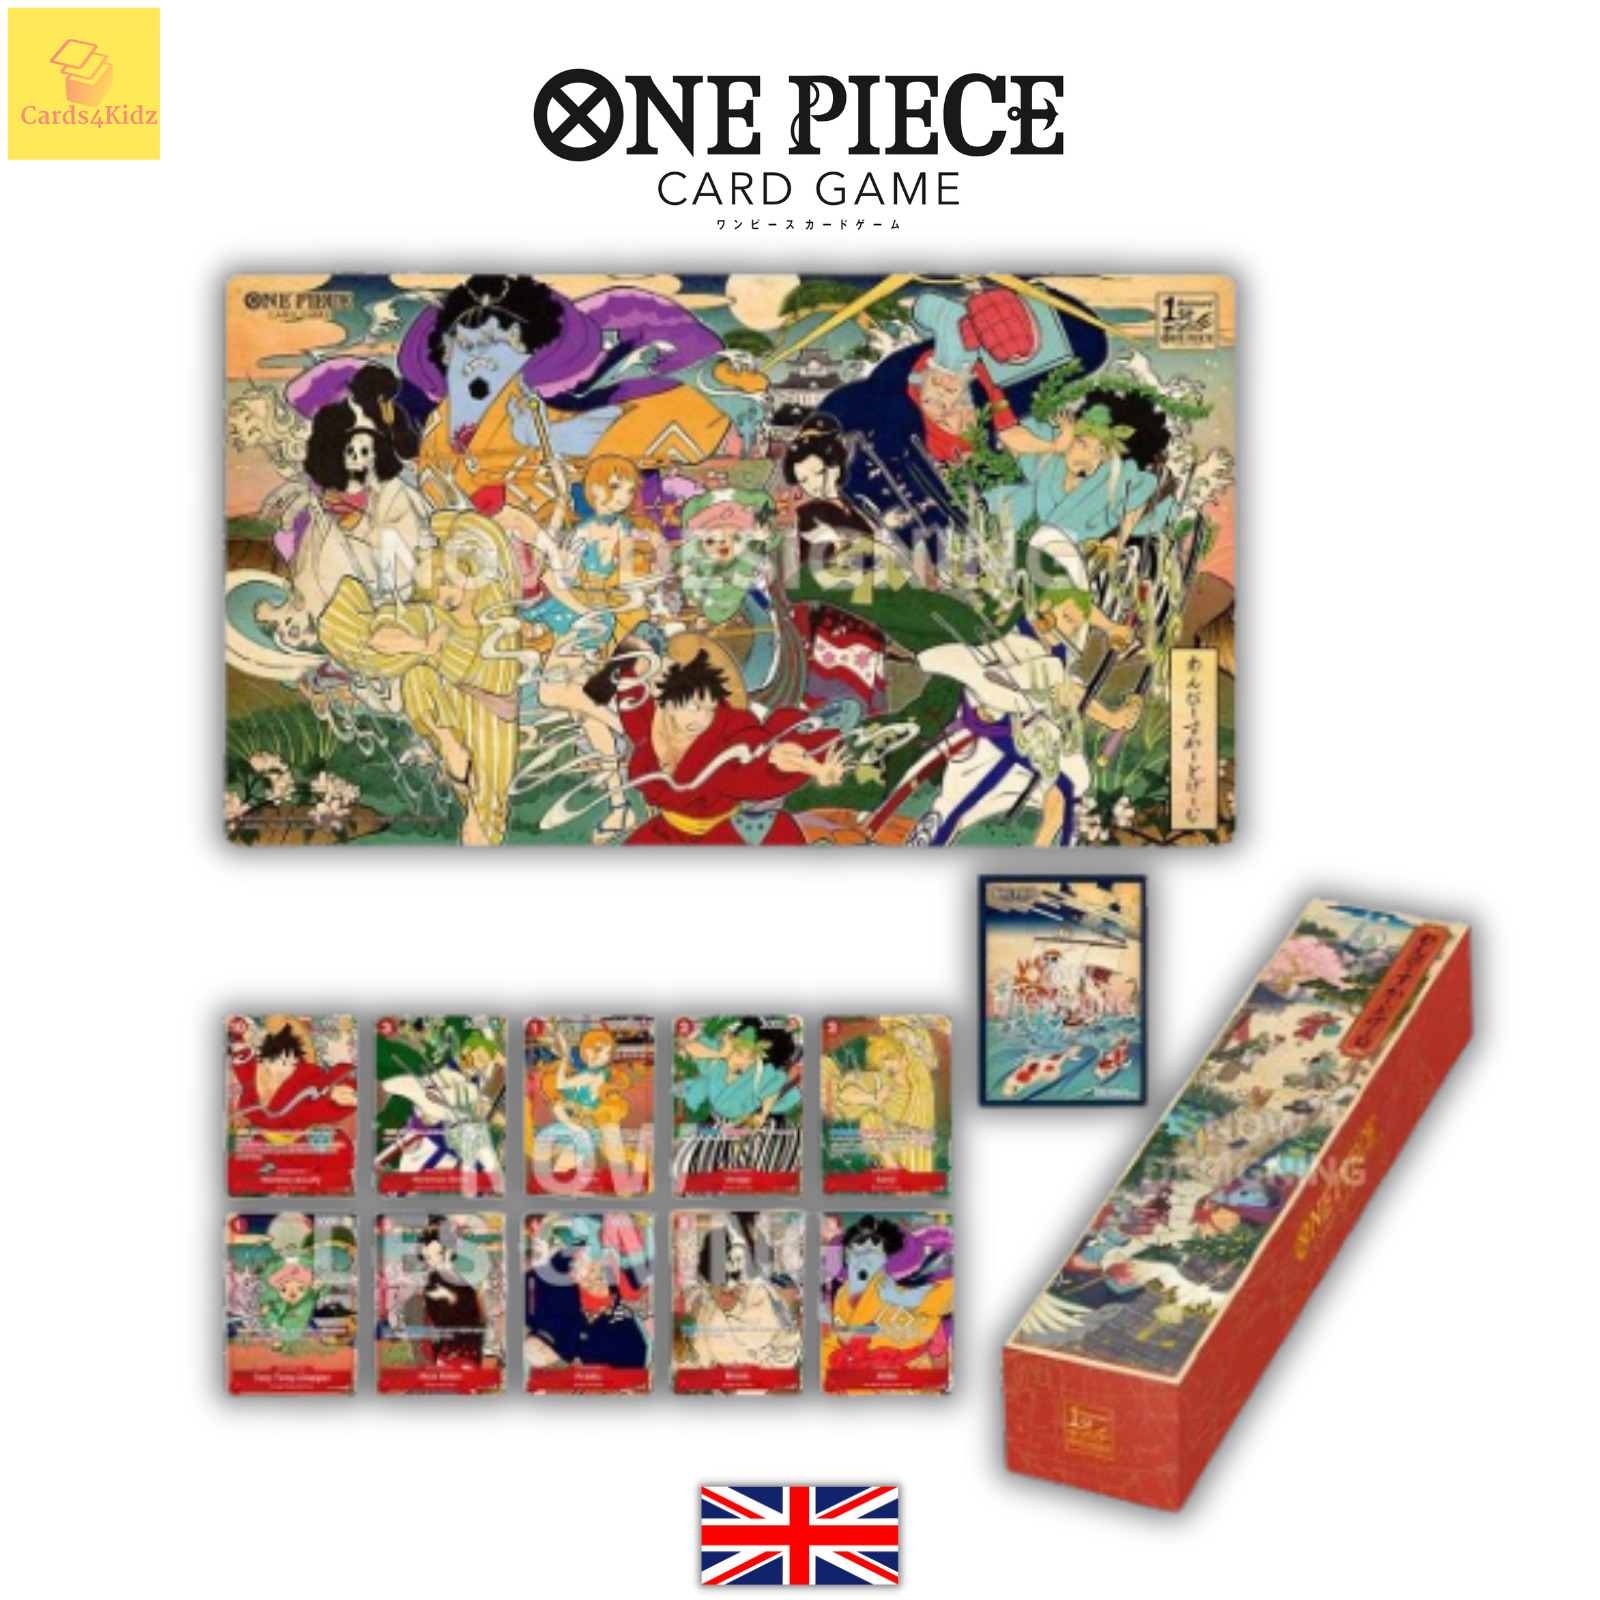 One Piece 1st Anniversary Set Collection Box New Sealed English